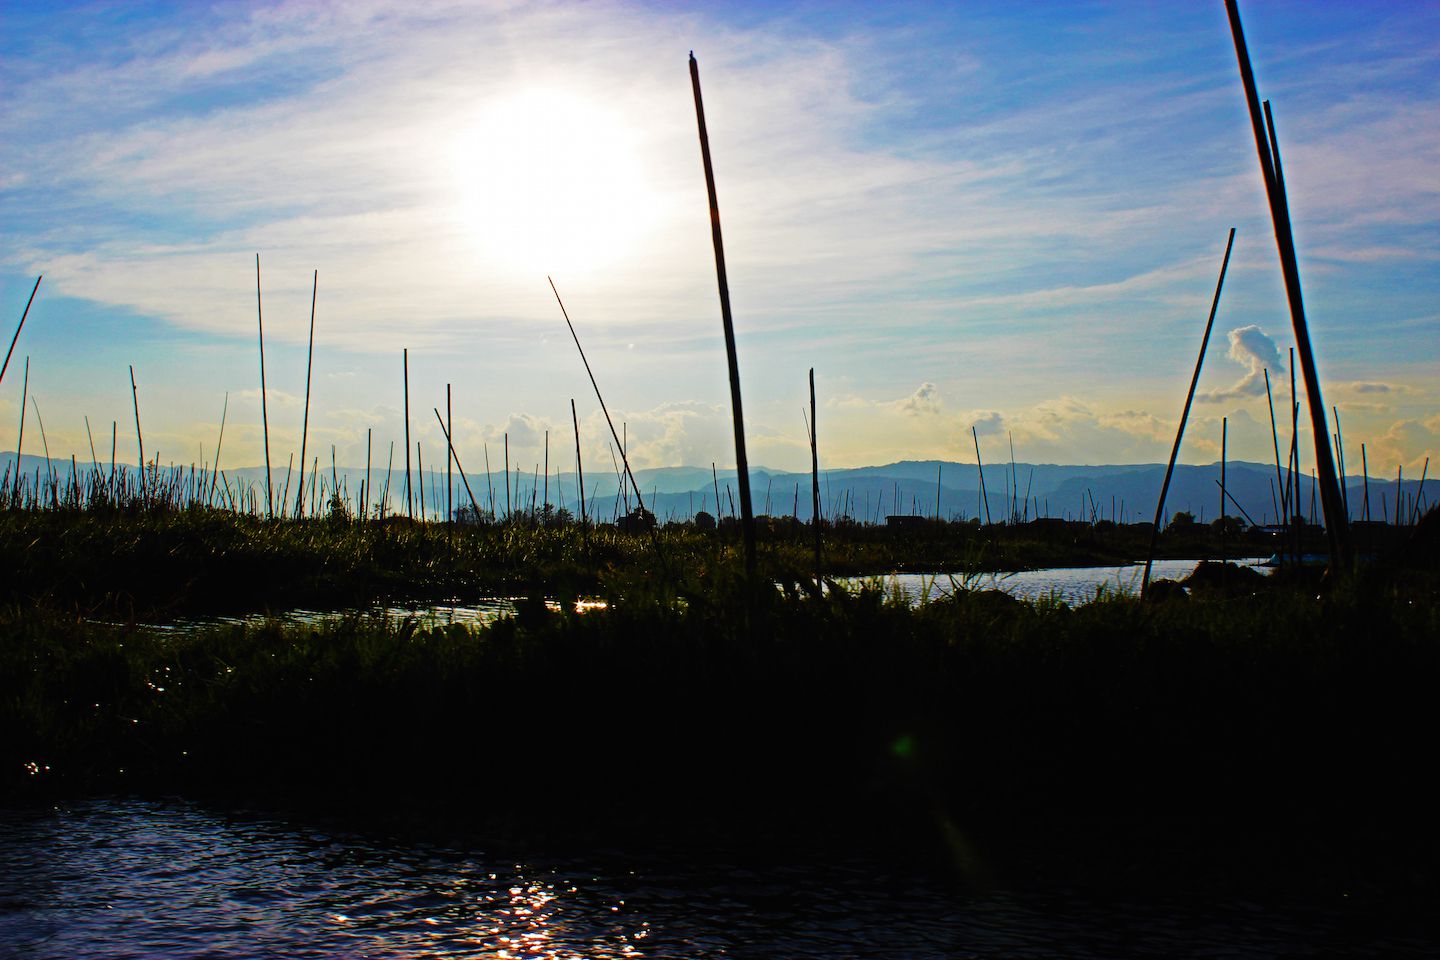 Sunset over the floating gardens of Inle Lake, Myanmar